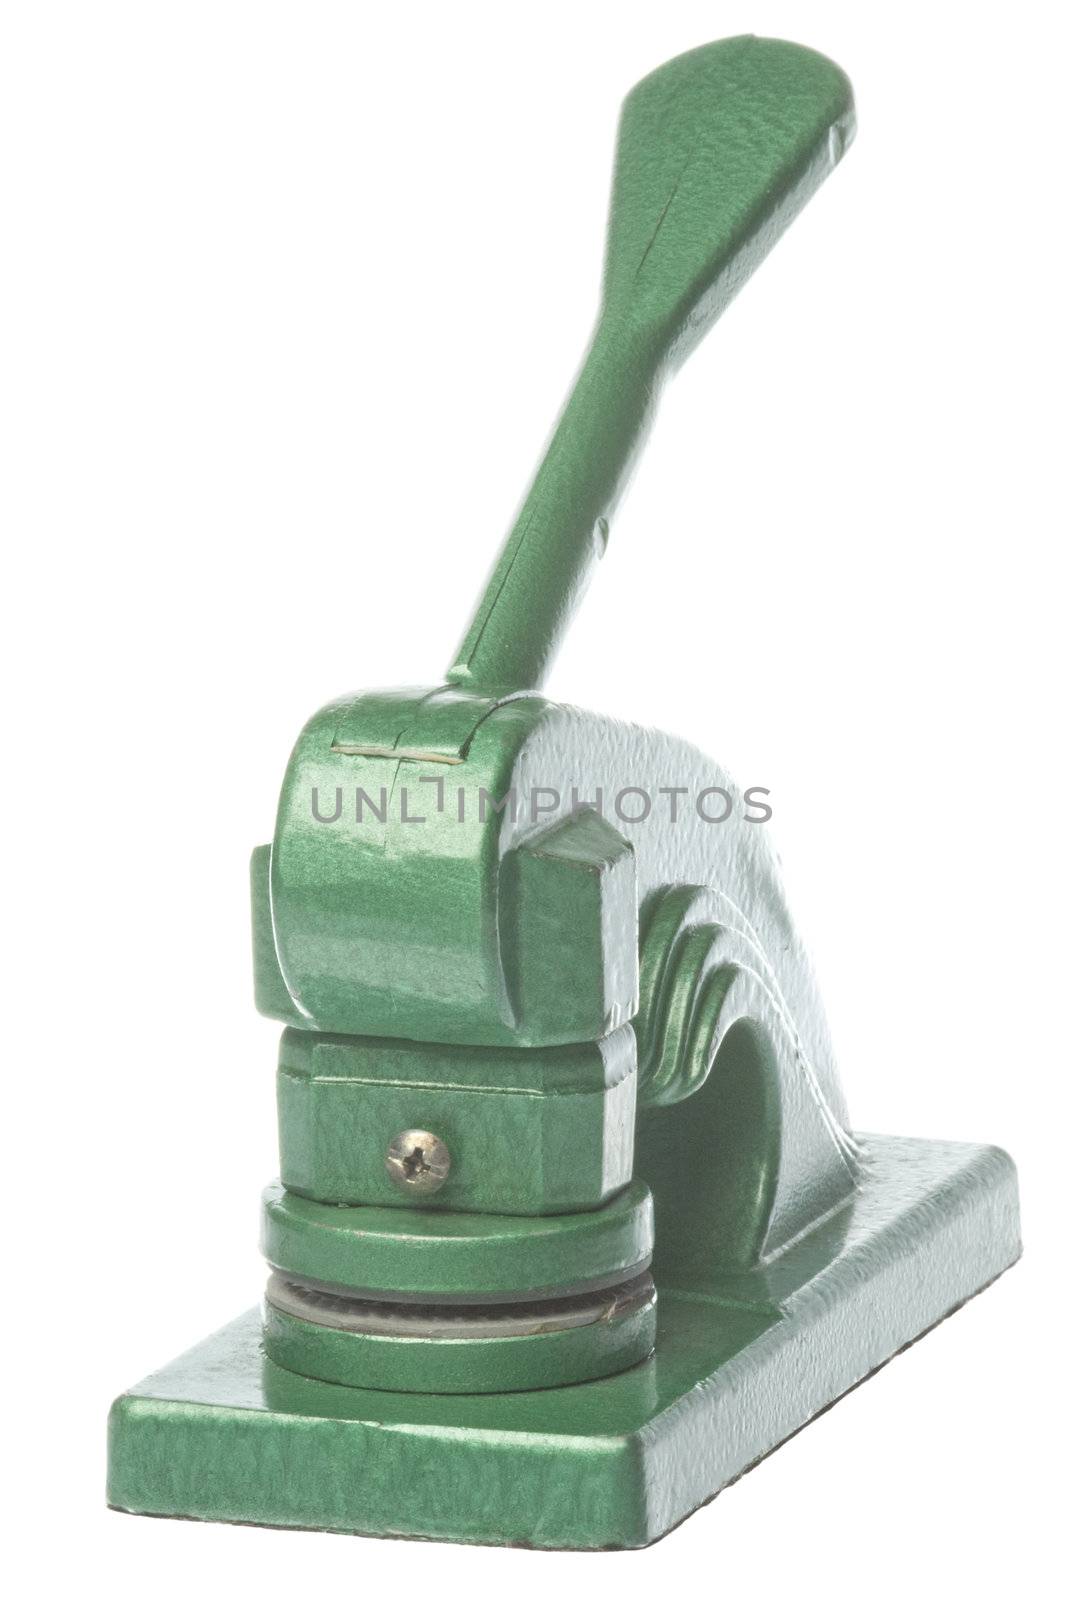 Isolated image of a devise for affixing the company's common seal.